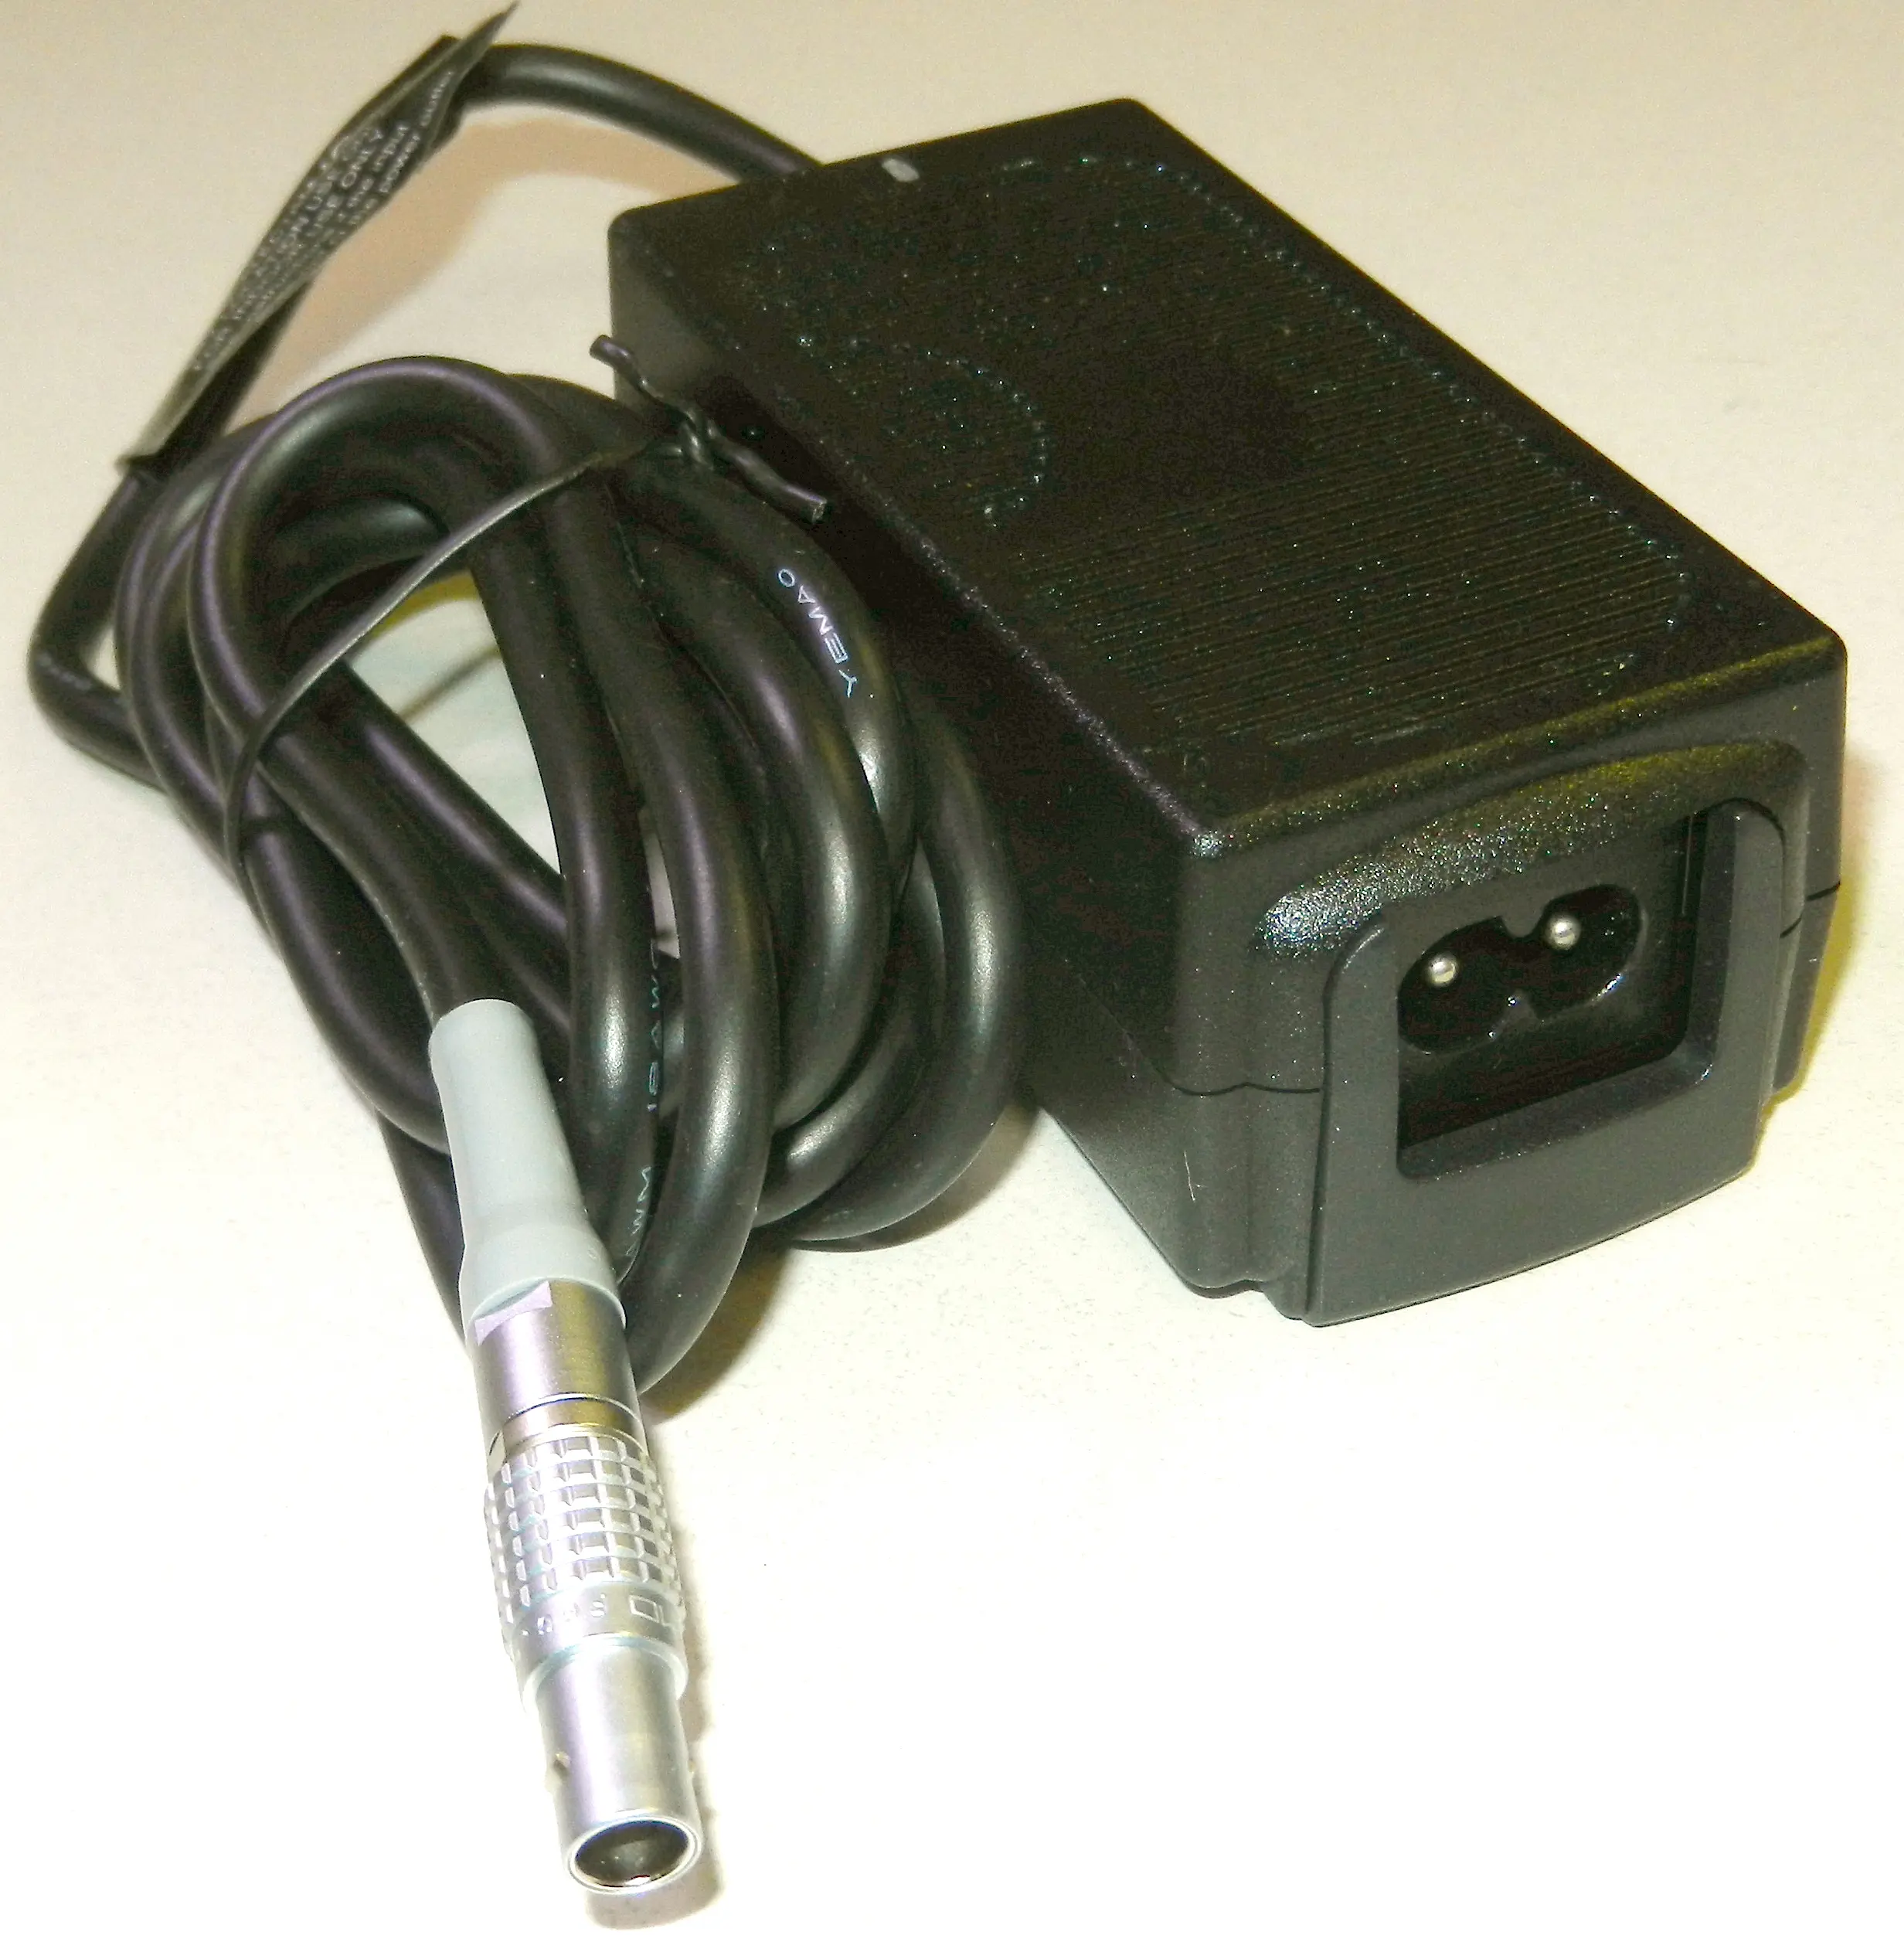 GlobTek offers power supplies and cable assemblies with 5-Pin Connector, Lemo P/N FGG.0B.305.CLAD52.Z with bend relief P/N GMA.0B.045.DG or Equivalent, PN  LEM5E/C18345